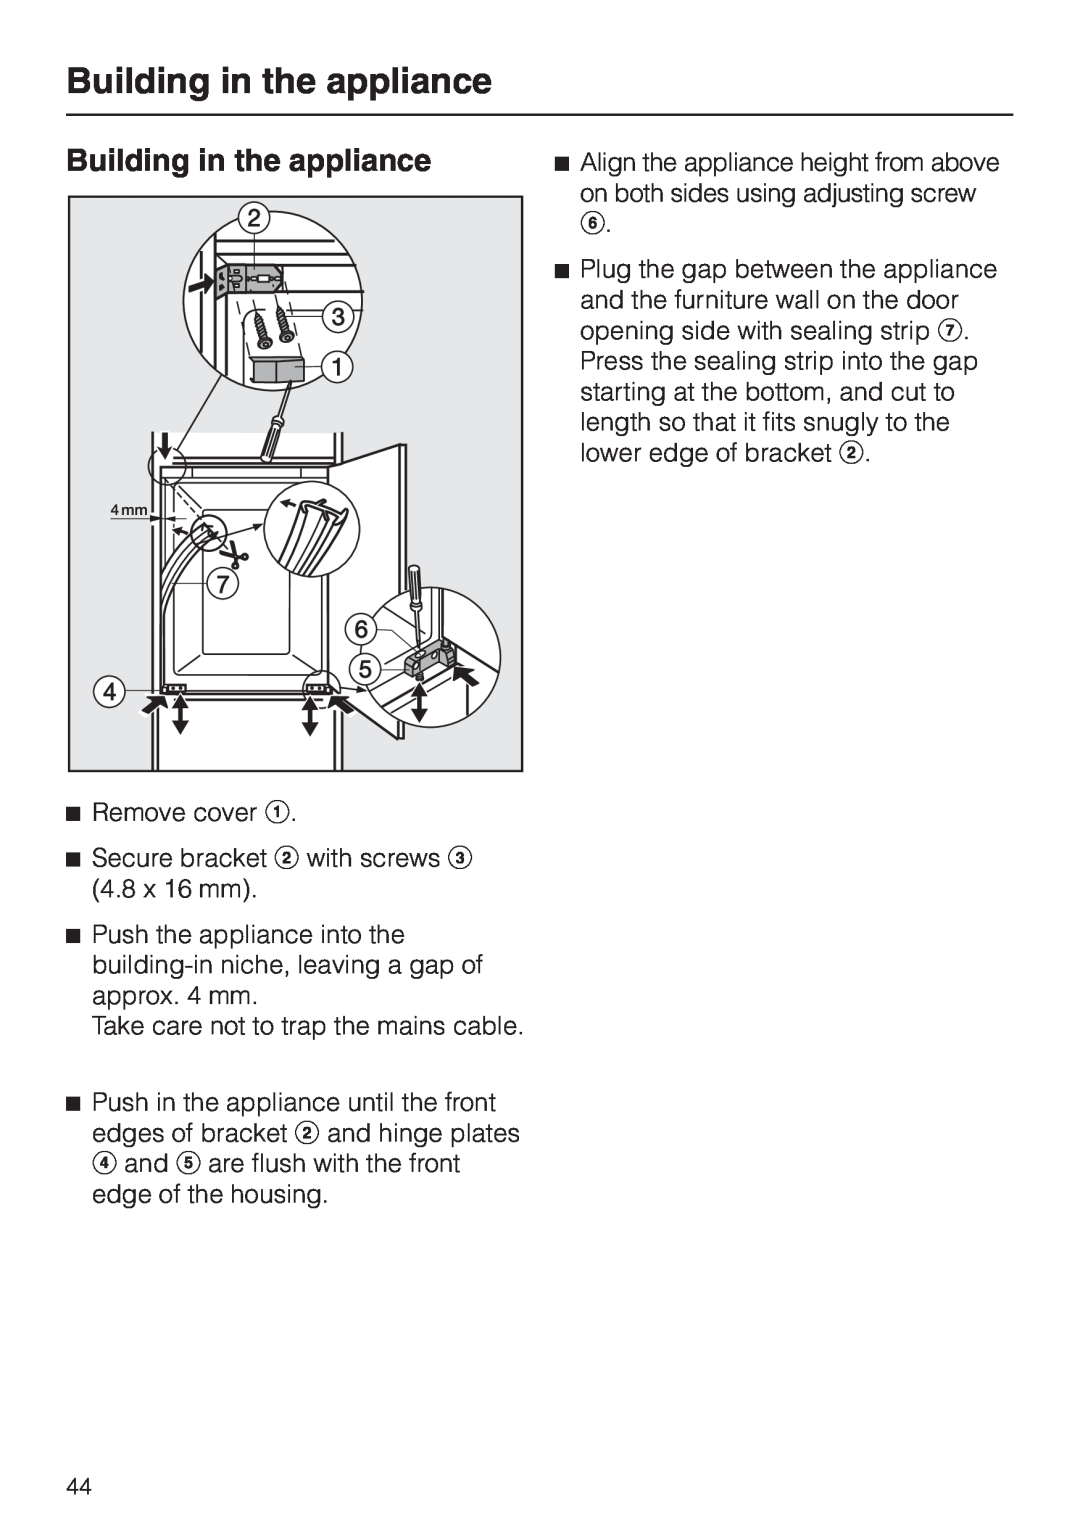 Miele K 9412 I, K 9212 I installation instructions Building in the appliance 